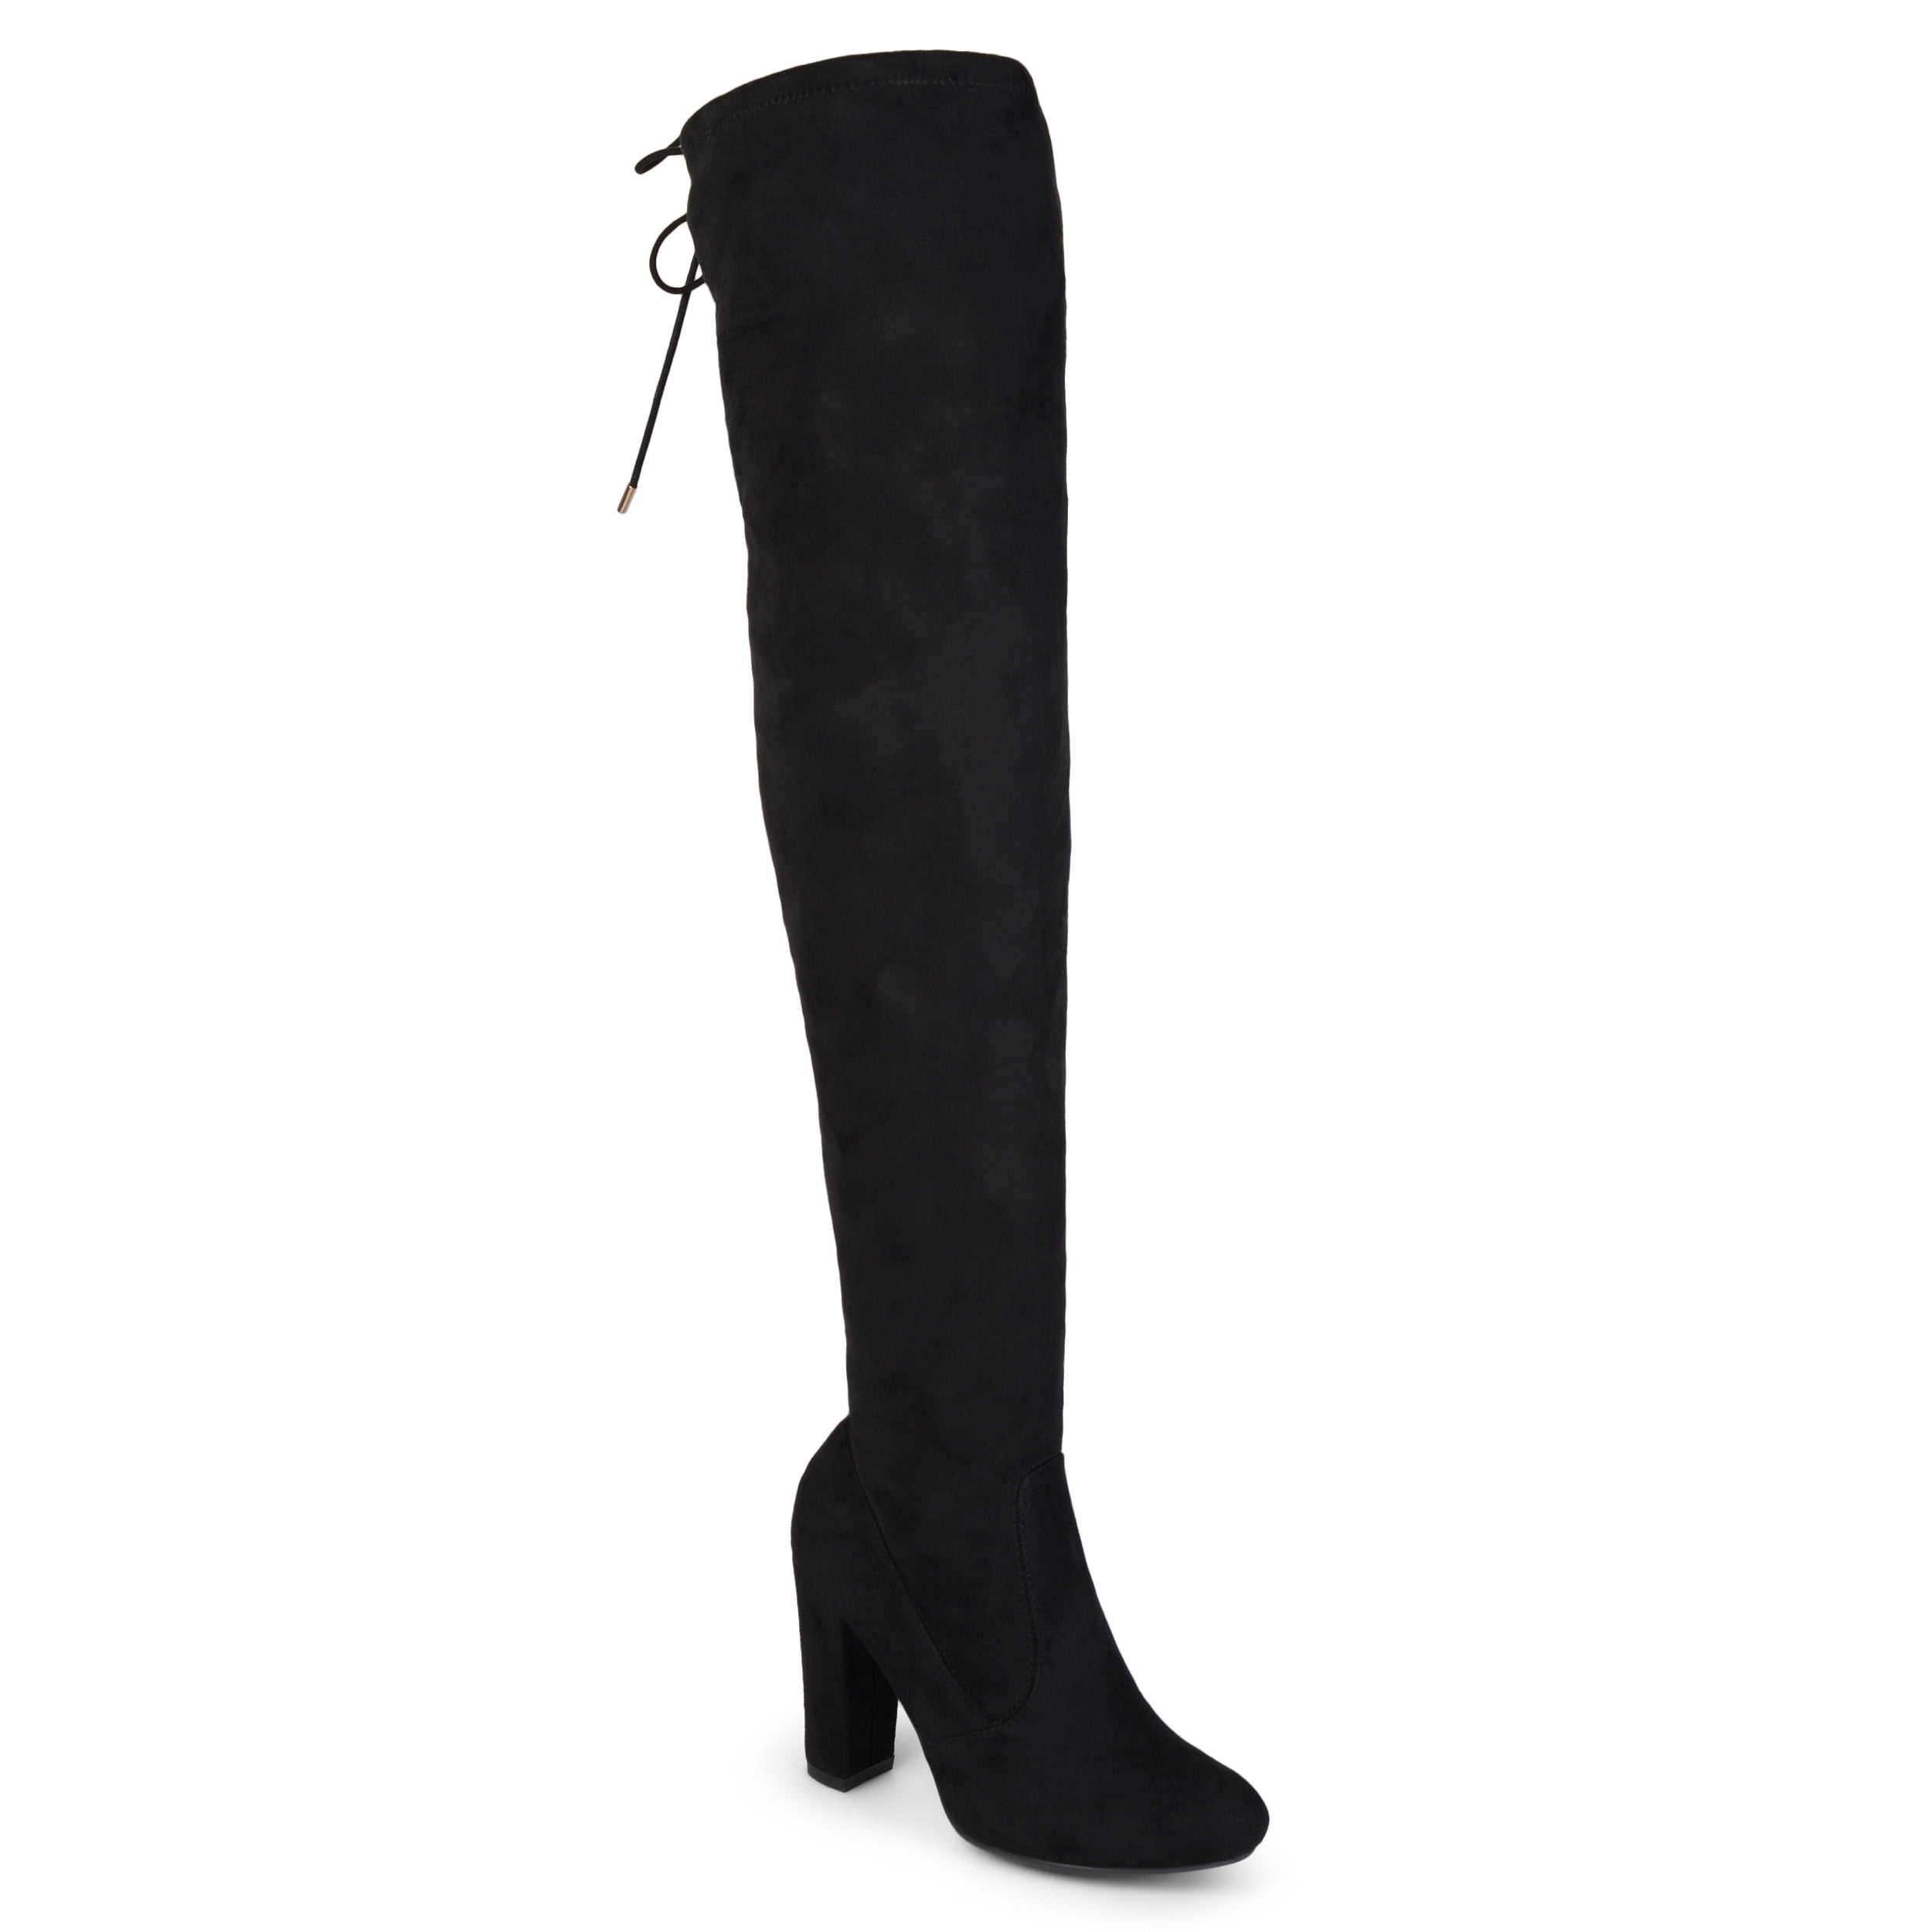 CAMSSOO Womens Comfortable Wide Square Toe Over The Knee Thigh High Low Block Heel Boots